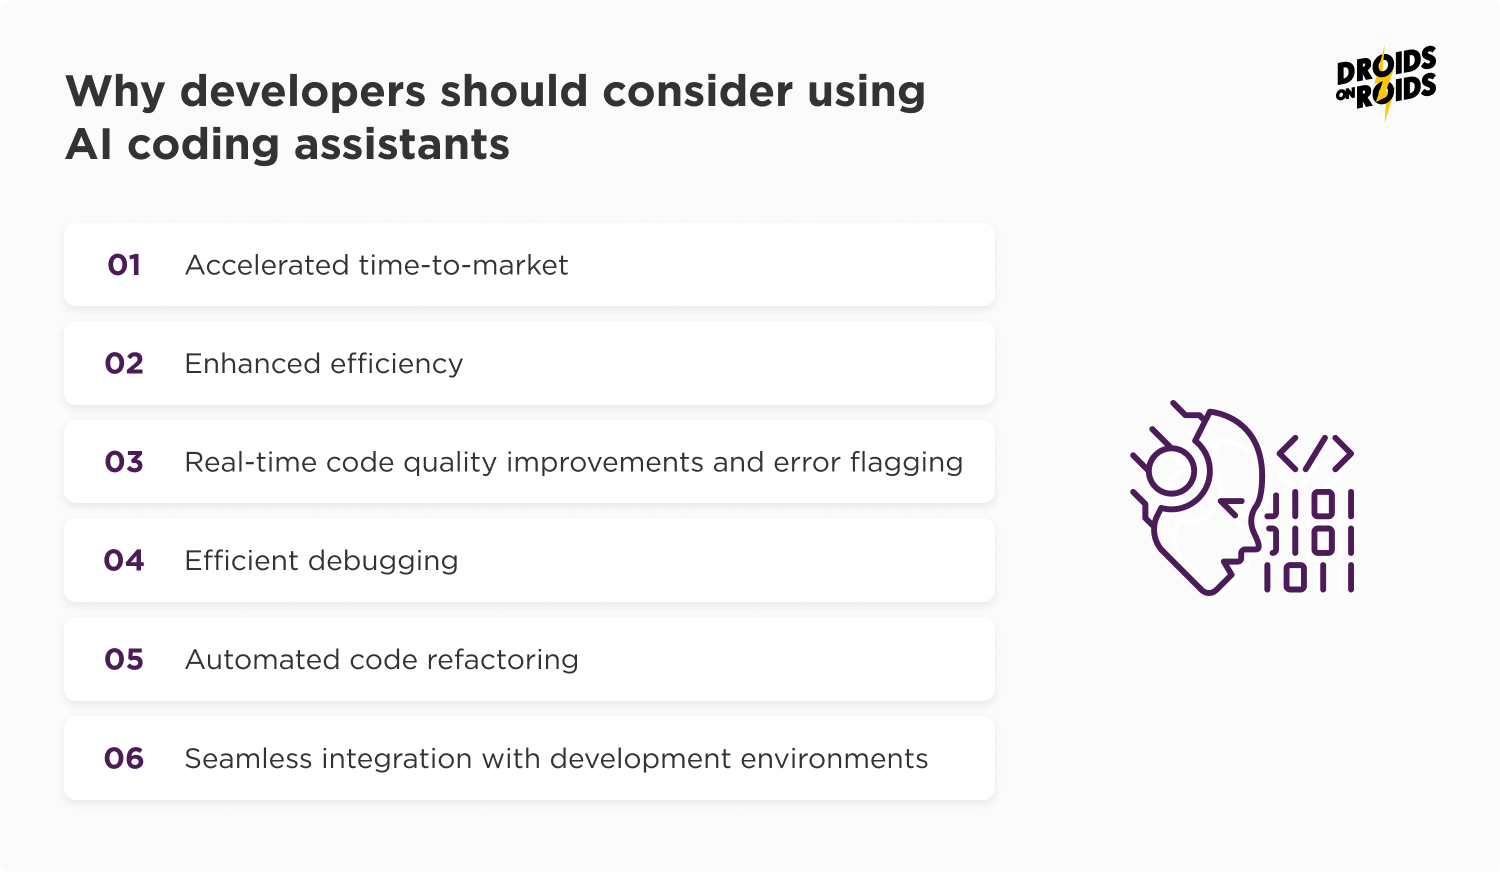 Why use AI Coding Assistants Tools